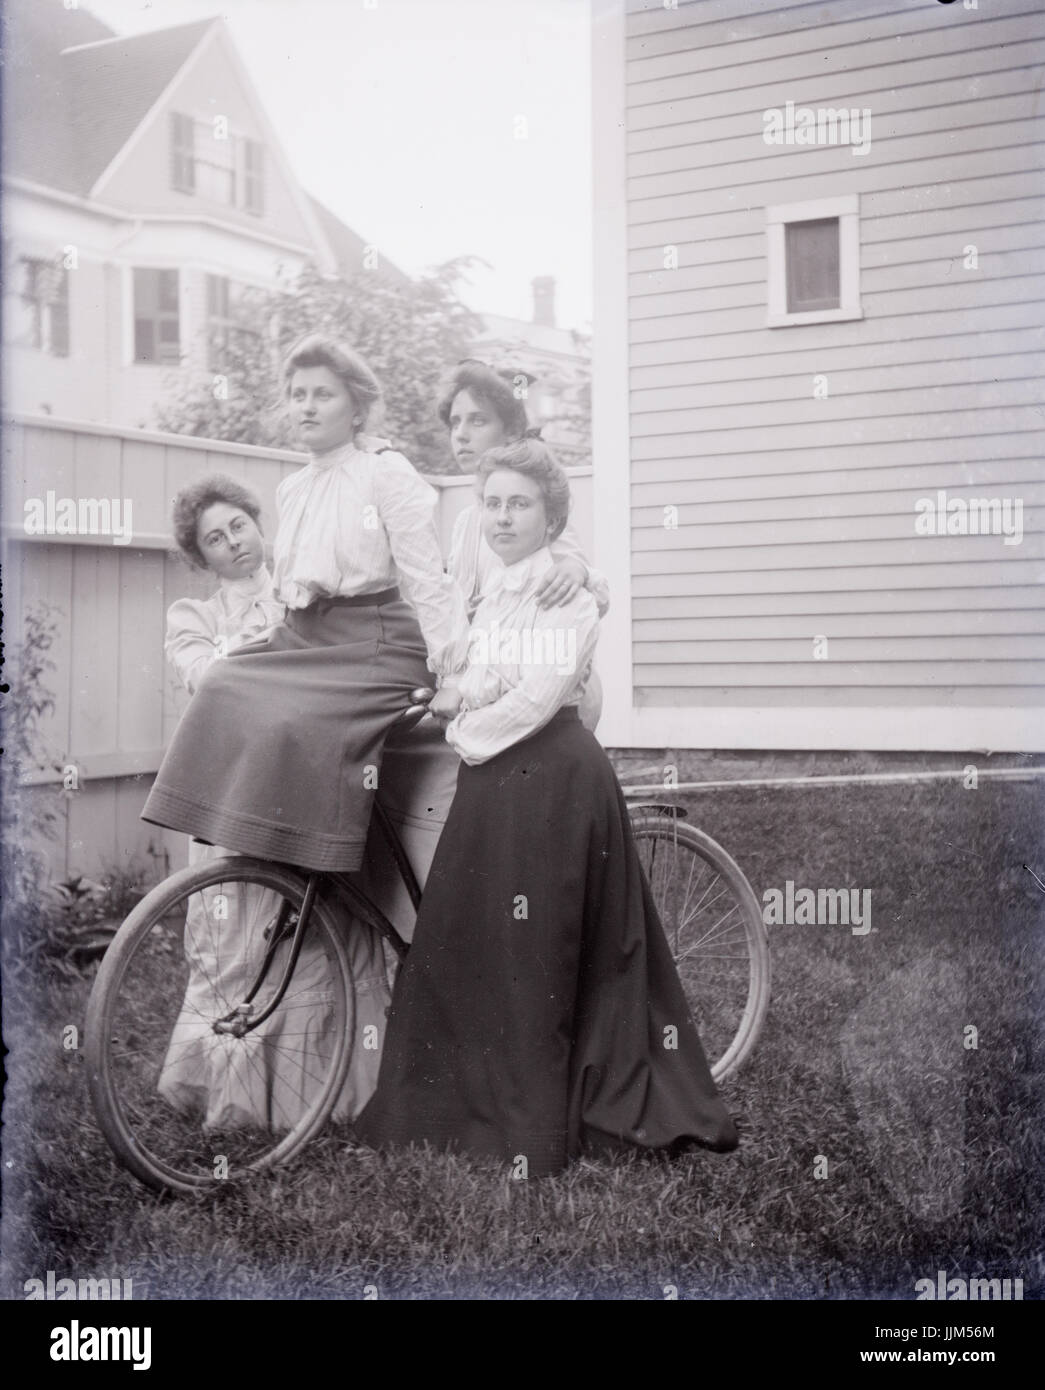 Antique c1910 photograph, four women on an antique bicycle. Location unknown, possibly Rhode Island, USA. SOURCE: ORIGINAL PHOTOGRAPH. Stock Photo